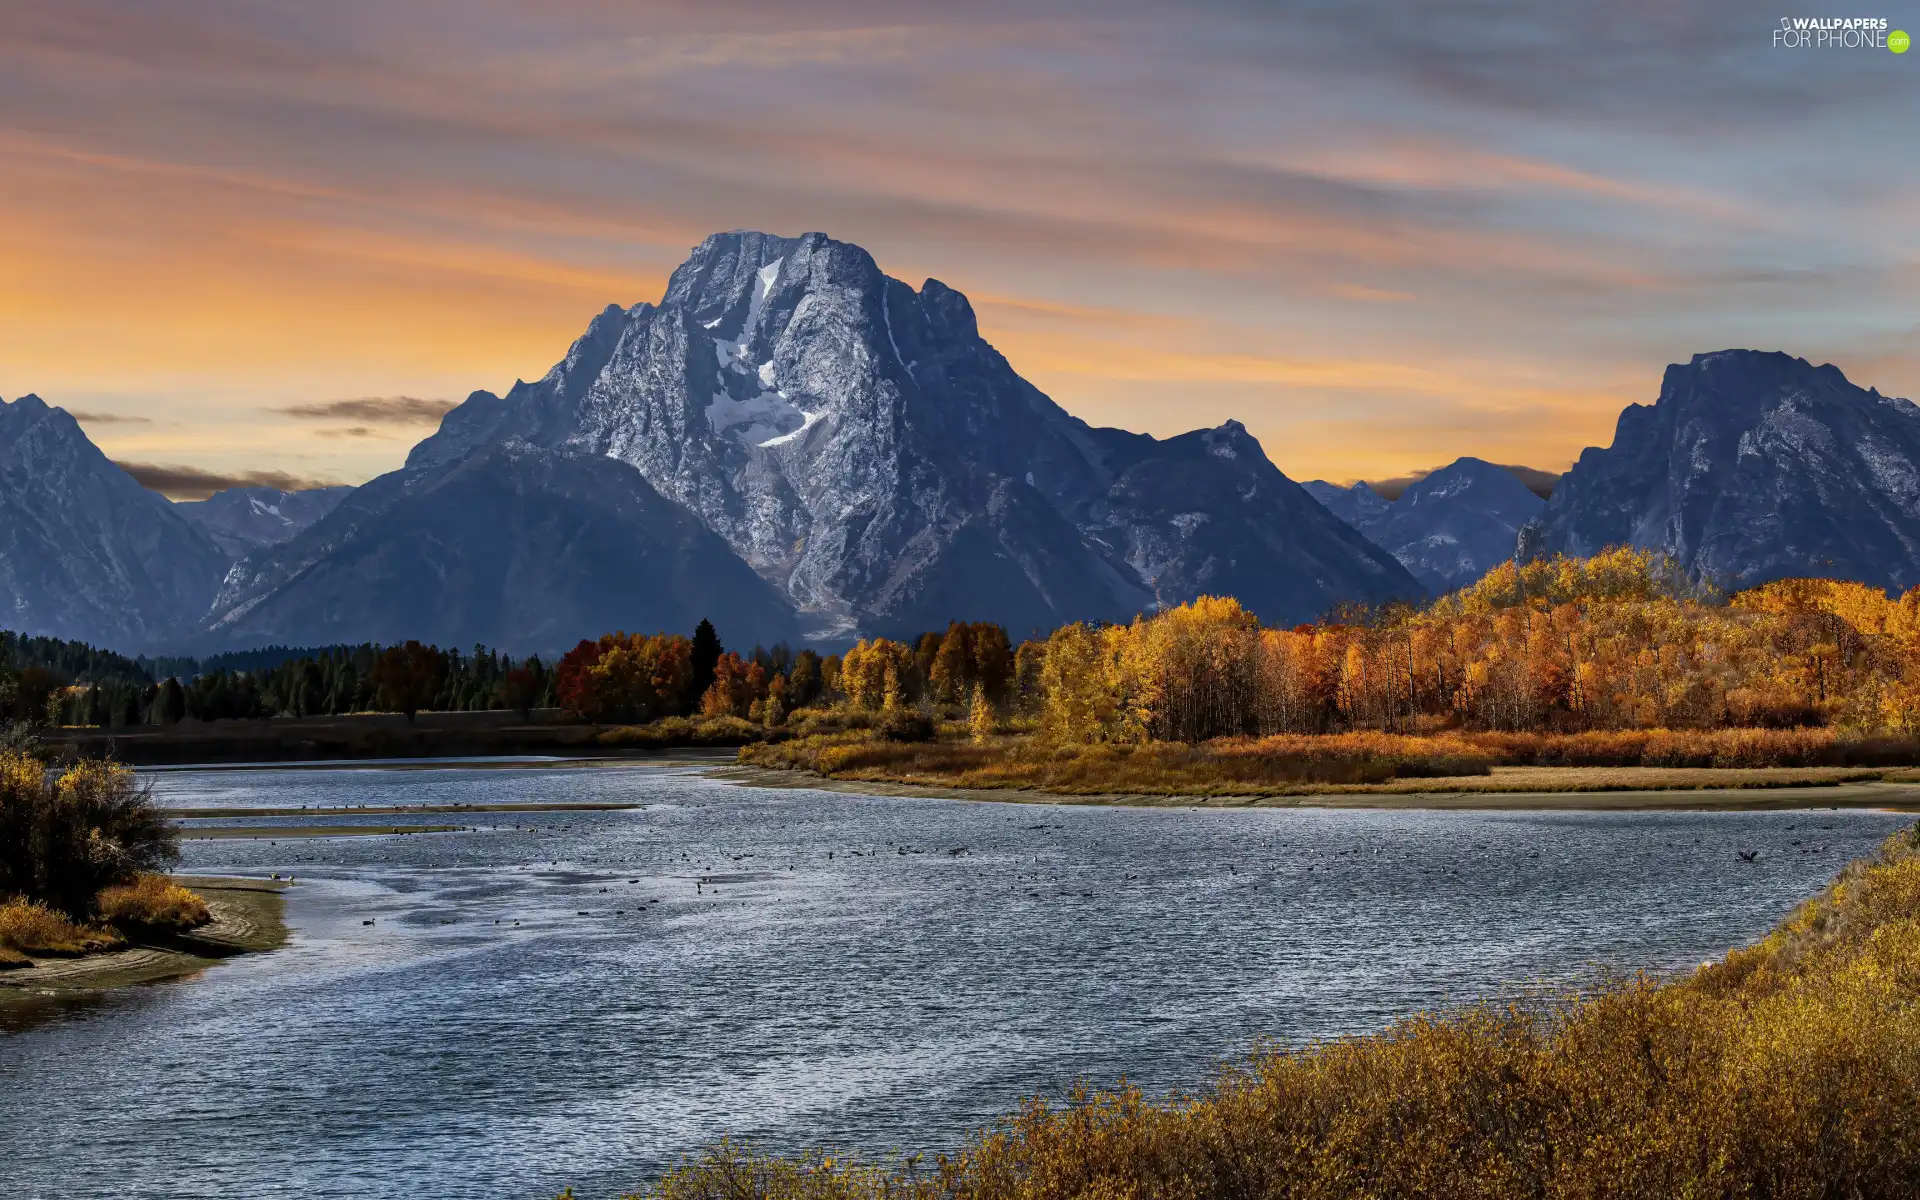 State of Wyoming, The United States, autumn, Grand Teton National Park, trees, viewes, Mountains, Mount Moran, Snake River